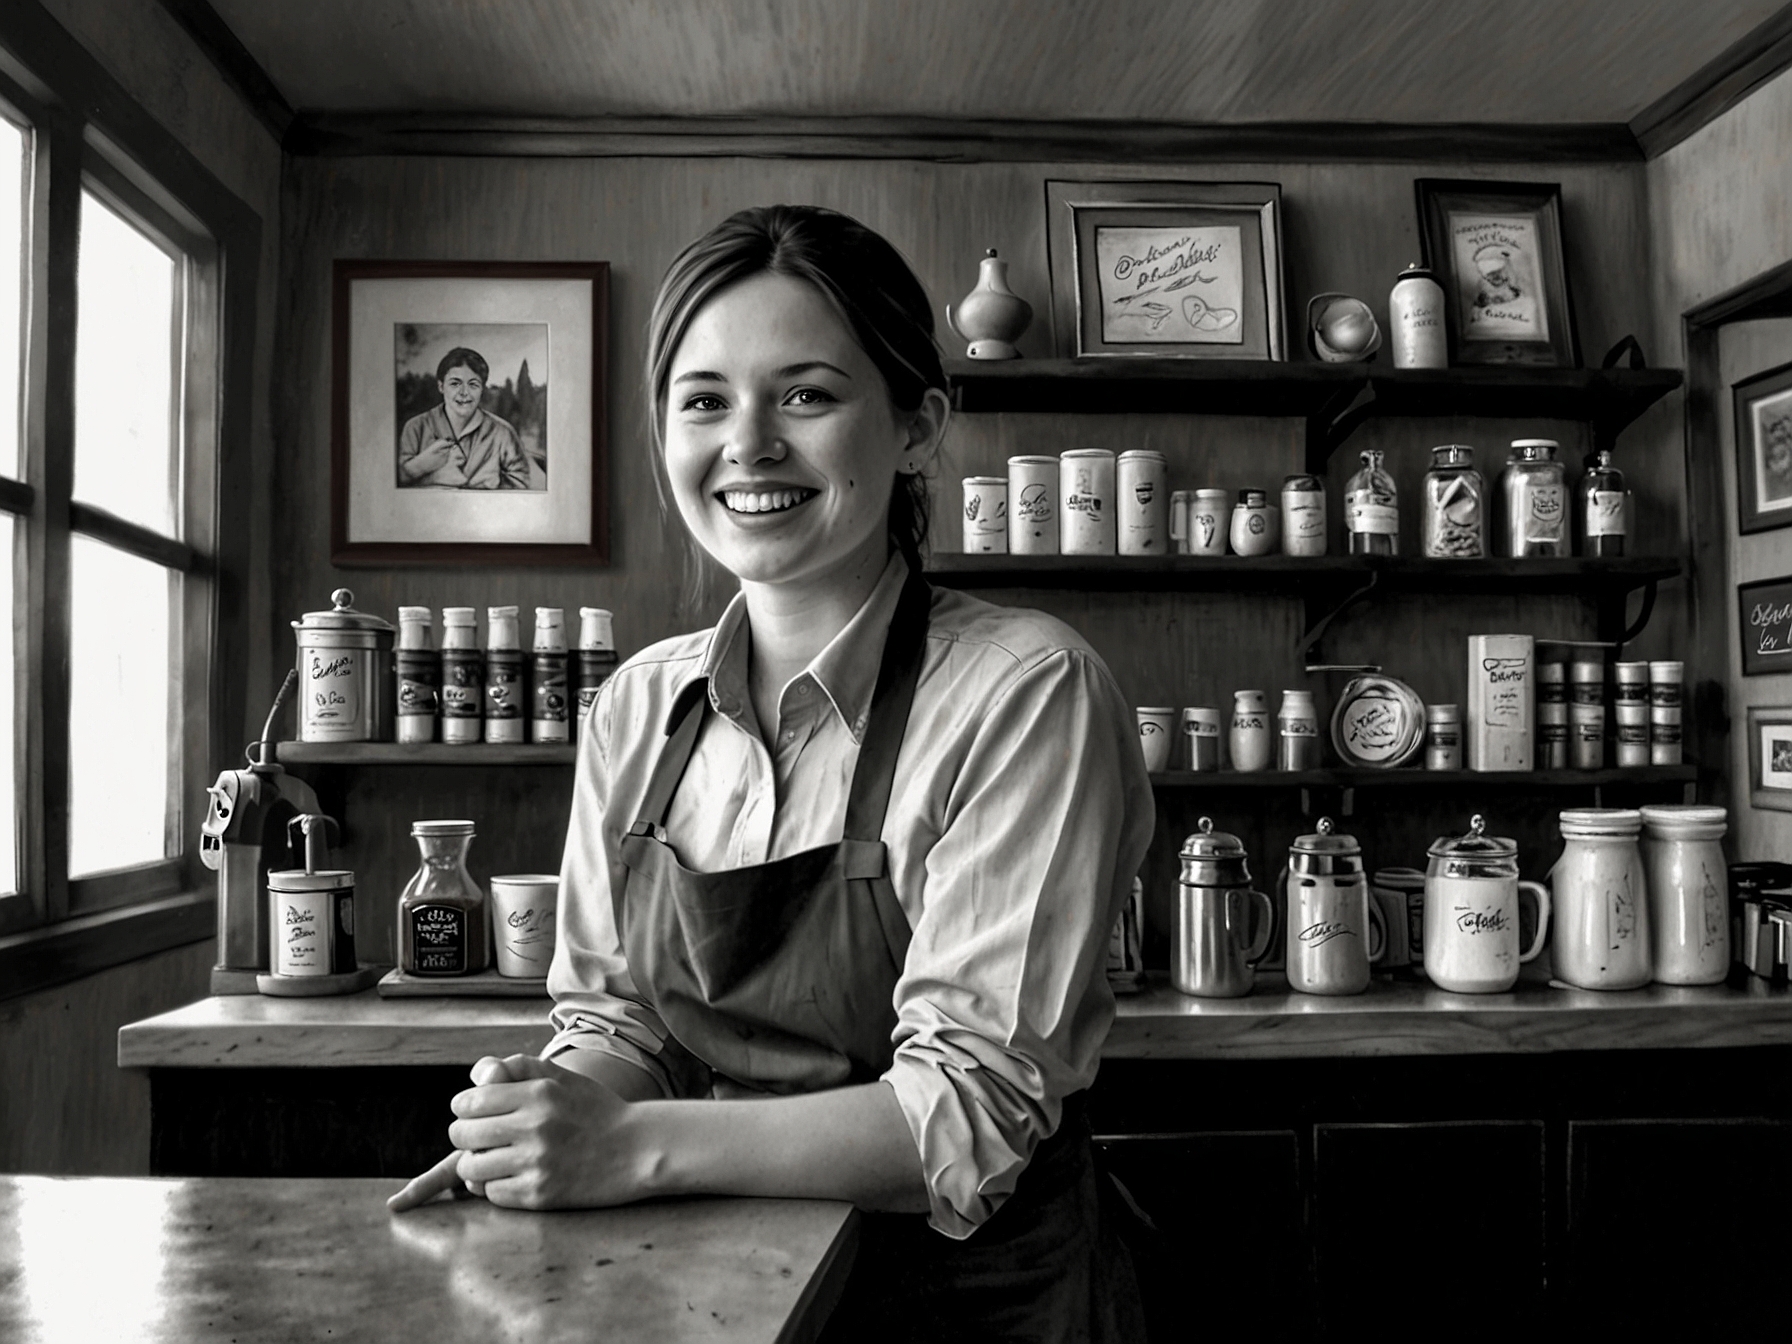 Leticia Cline is seen behind the counter of Main Street Coffee and Goods, warmly serving a customer. The coffee shop's cozy interior, decorated with a charming and rustic aesthetic, reflects her keen eye for detail.